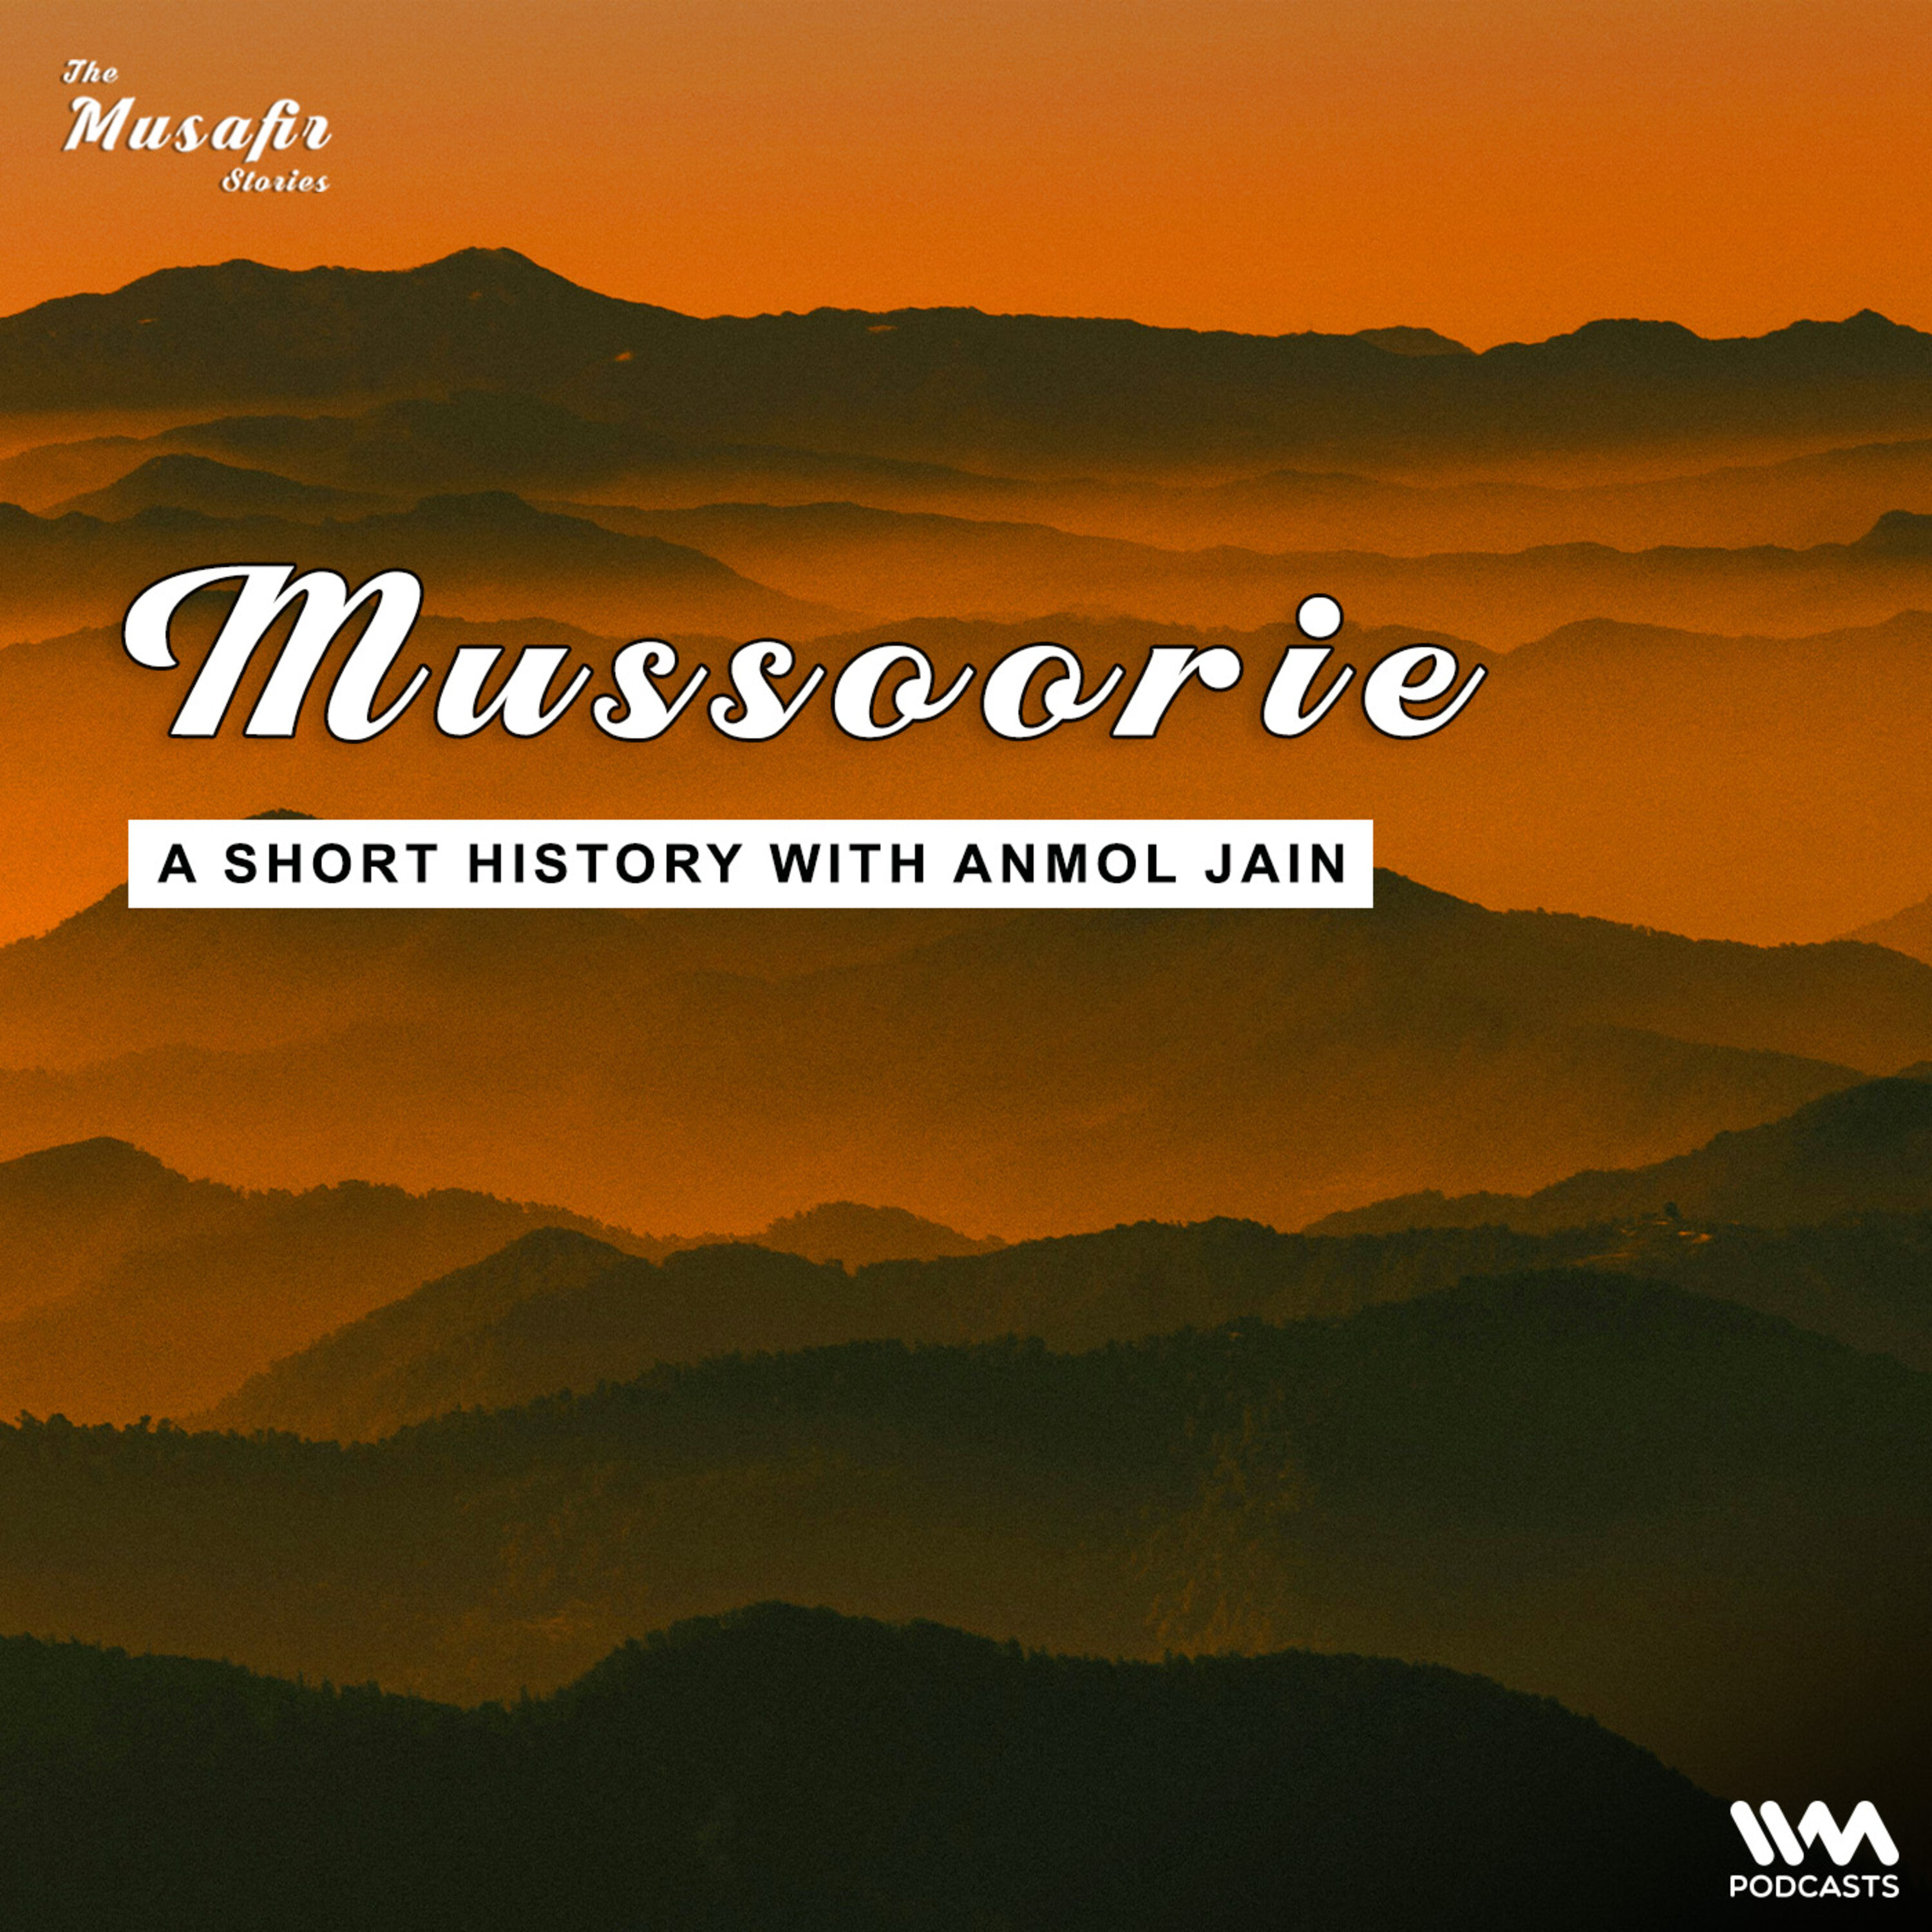 Mussoorie – A short history with Anmol Jain